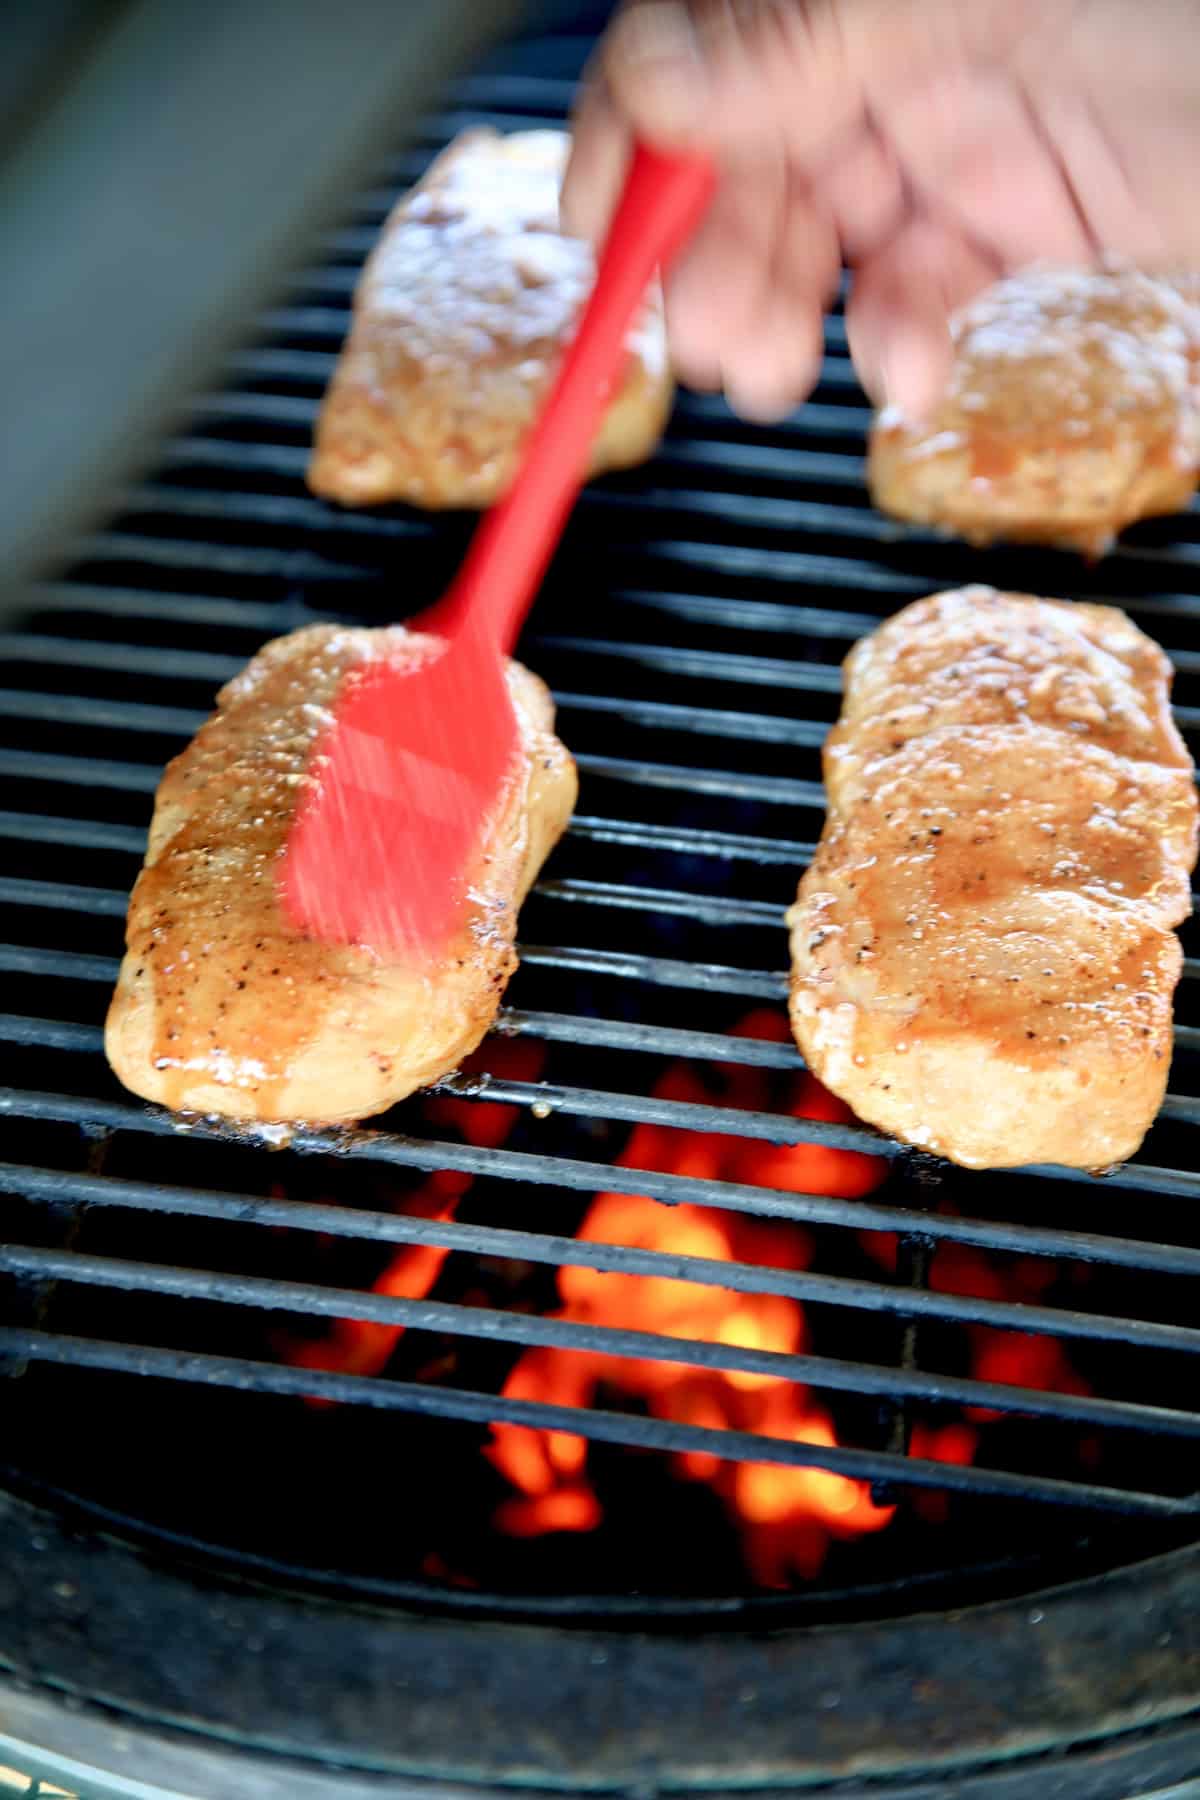 Brushing pork chops with sauce on a grill.